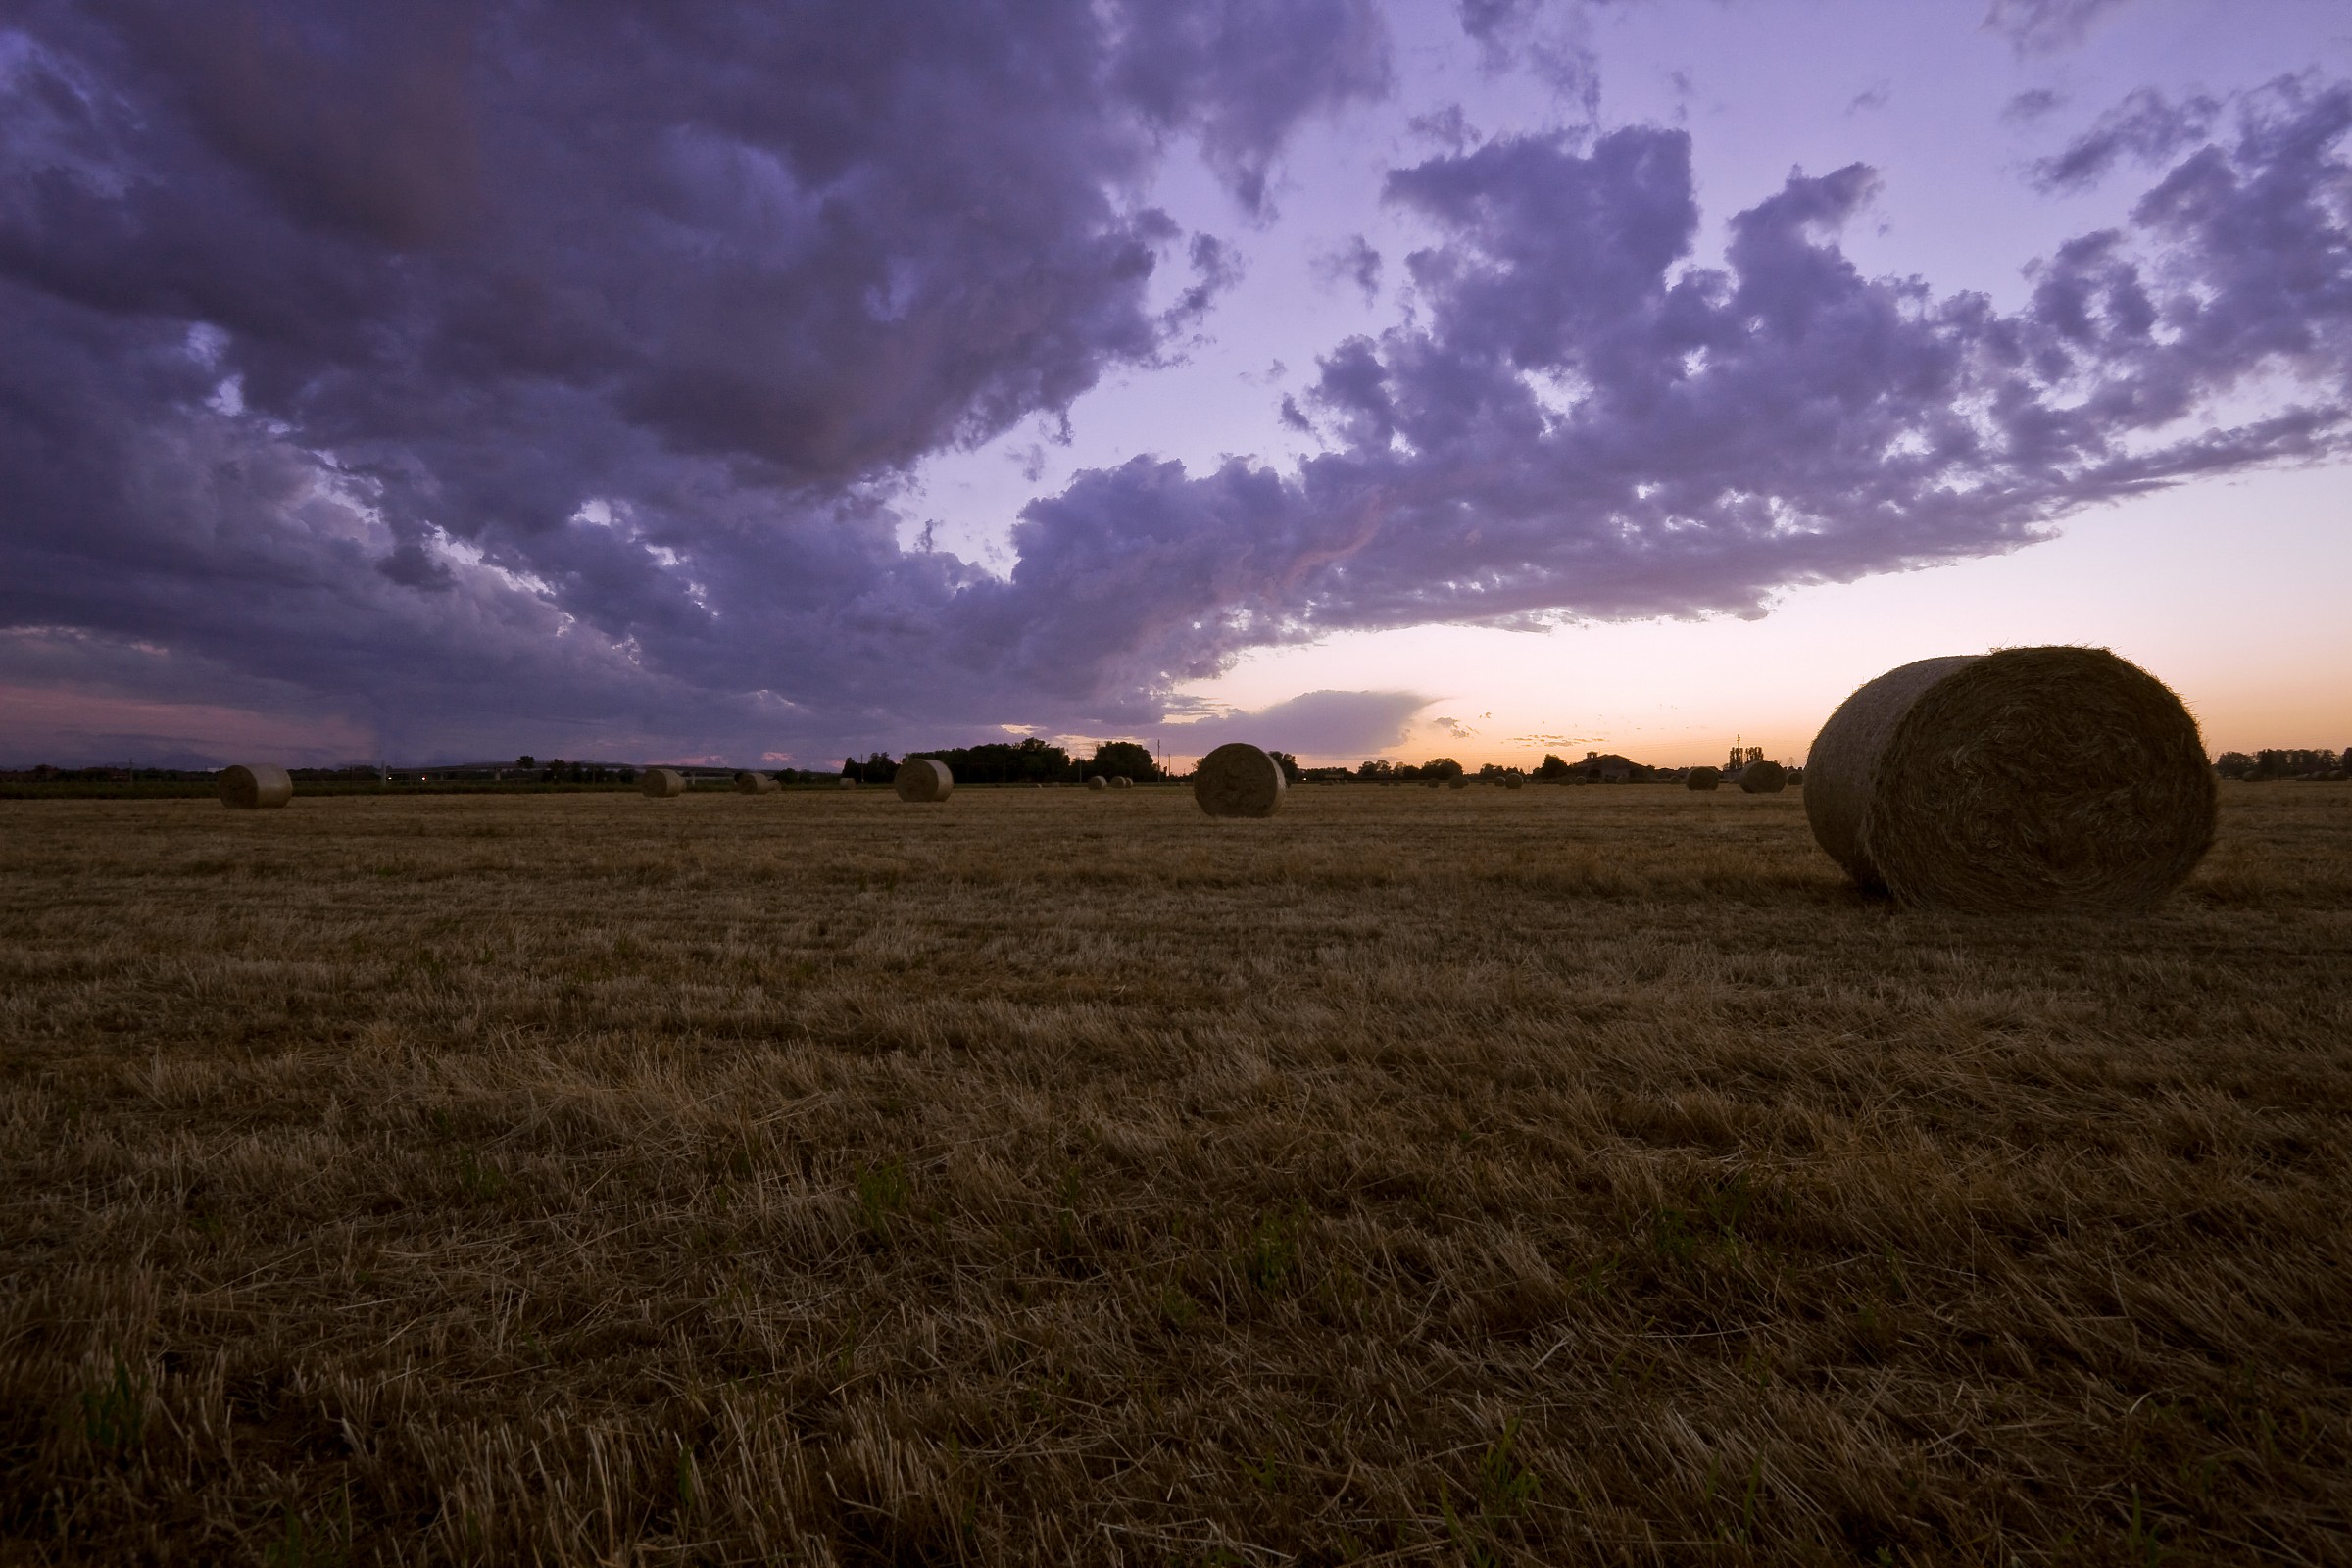 Sunset on the bales...